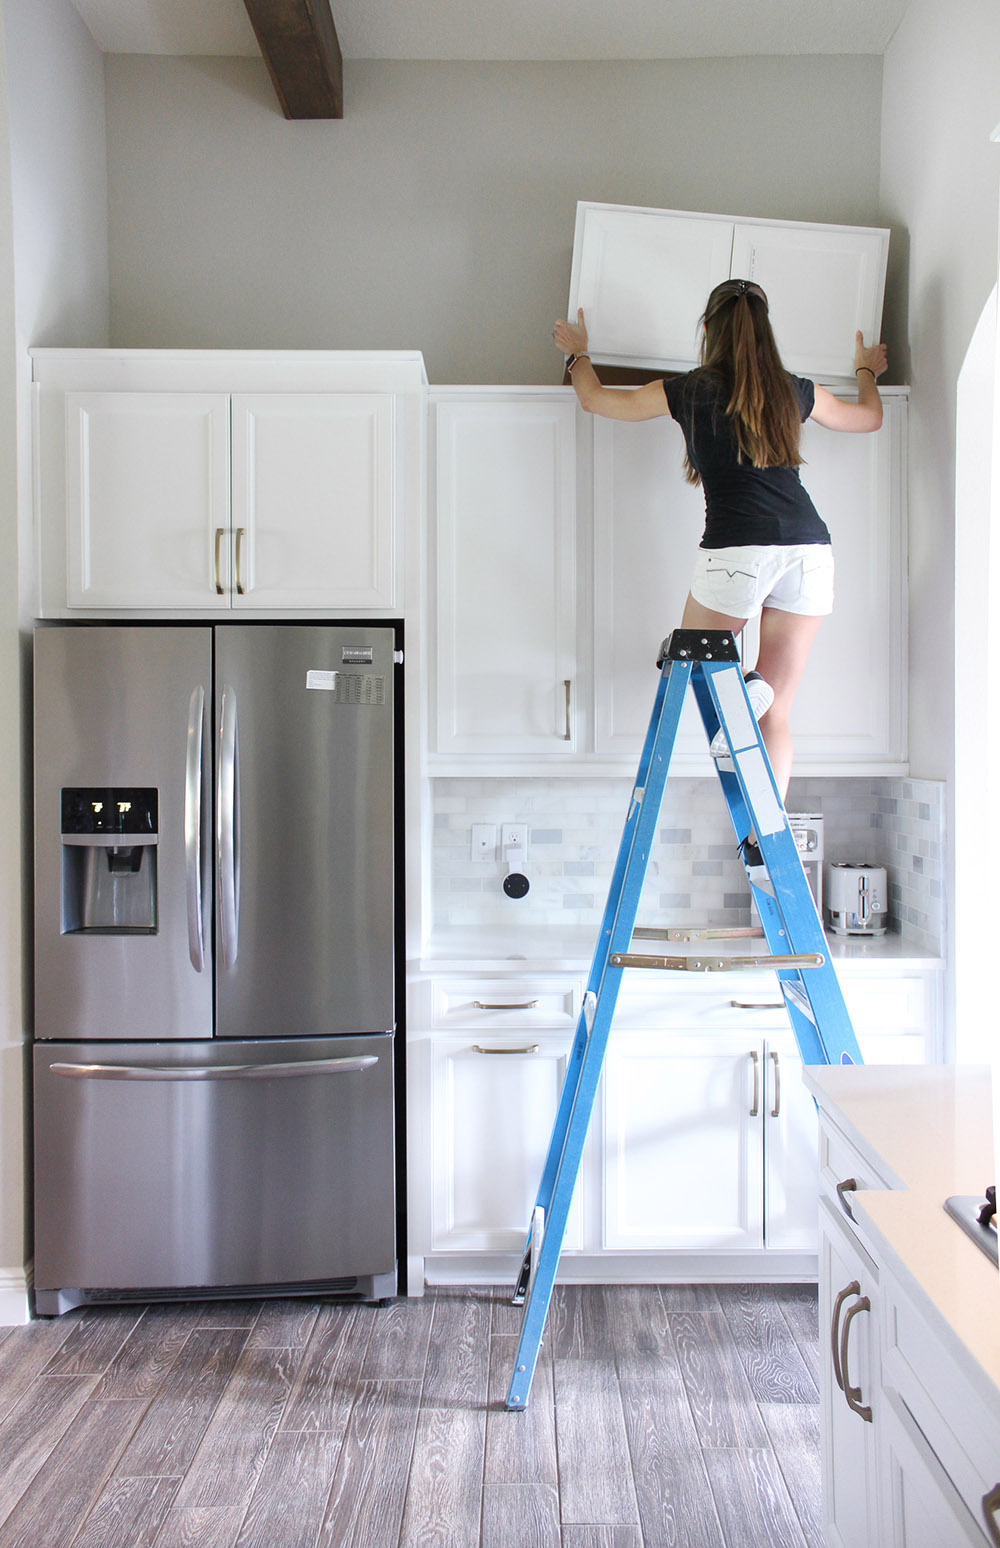 A woman standing on a ladder adds a smaller row of cabinets to the top of the current kitchen cabinets.